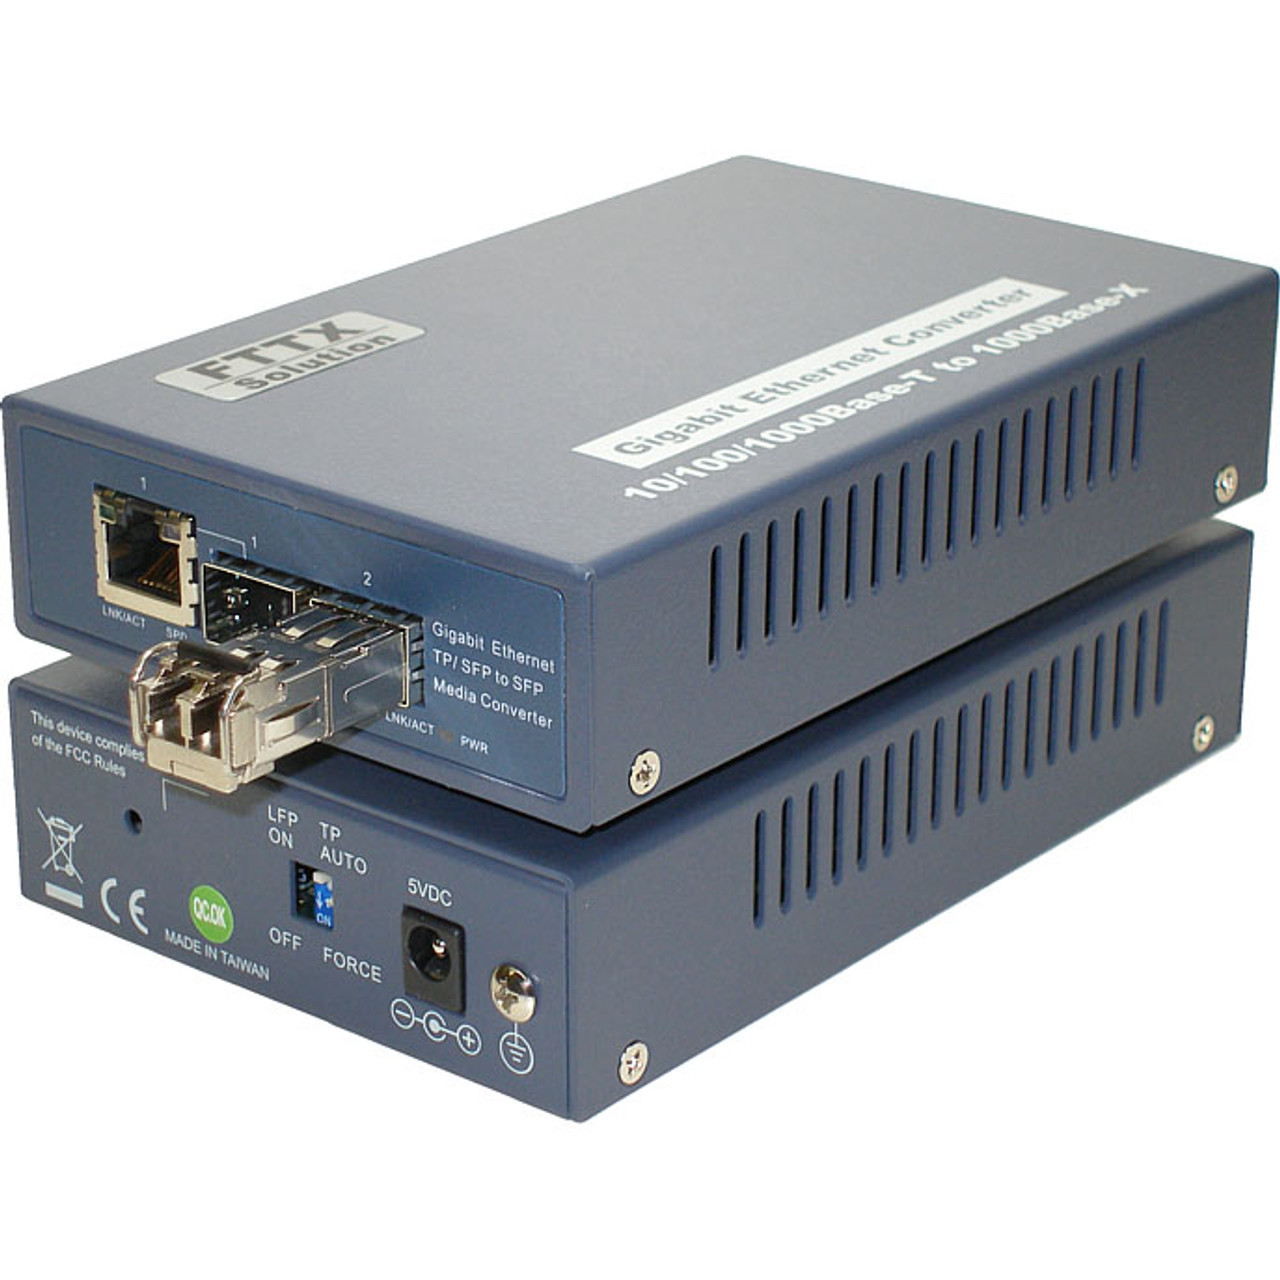 Media Converter,GbE SFP/LC MM To 10/100/1000Base-T/GbE